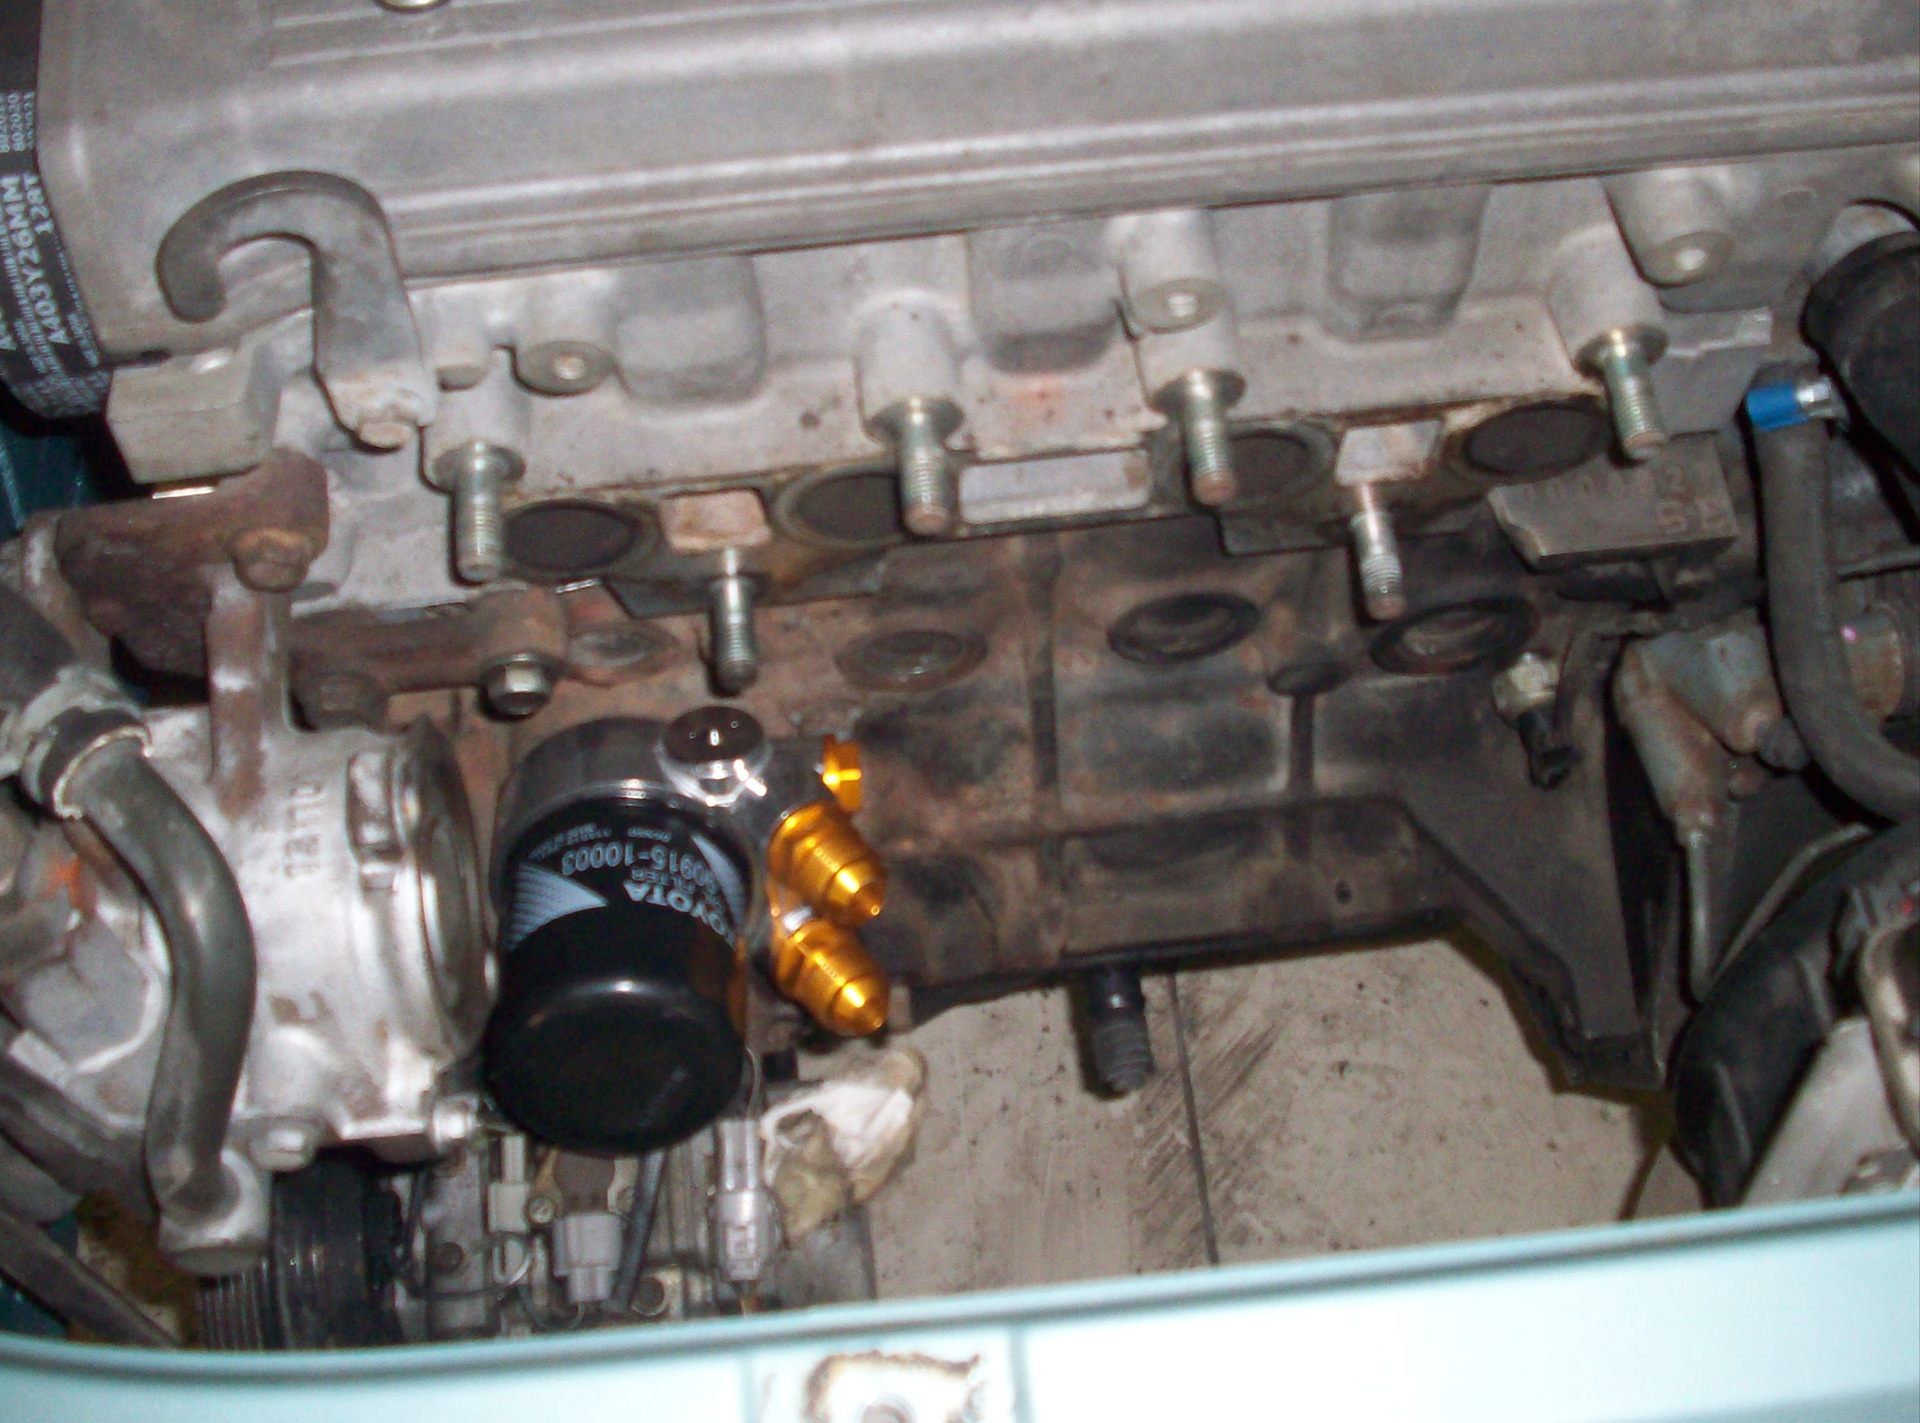 The third stage - truncated that under the hood - Toyota Sera 15 L 1990